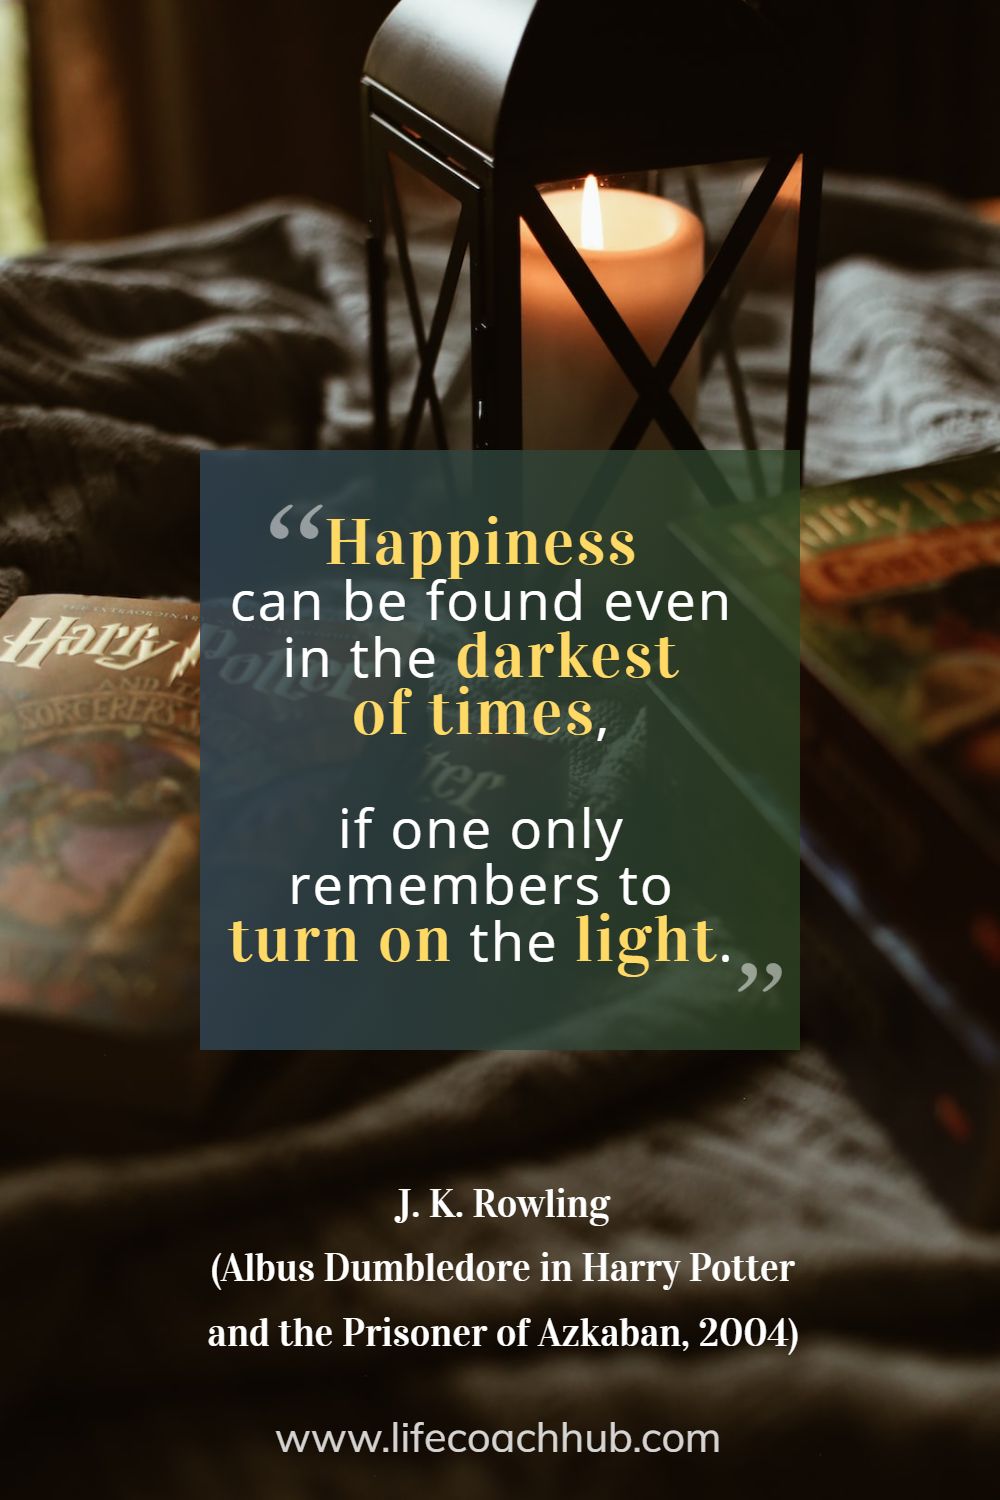 Happiness can be found even in the darkest of times, if one only remembers to turn on the light. J. K. Rowling (Albus Dumbledore in Harry Potter and the Prisoner of Azkaban, 2004) Coaching Quote